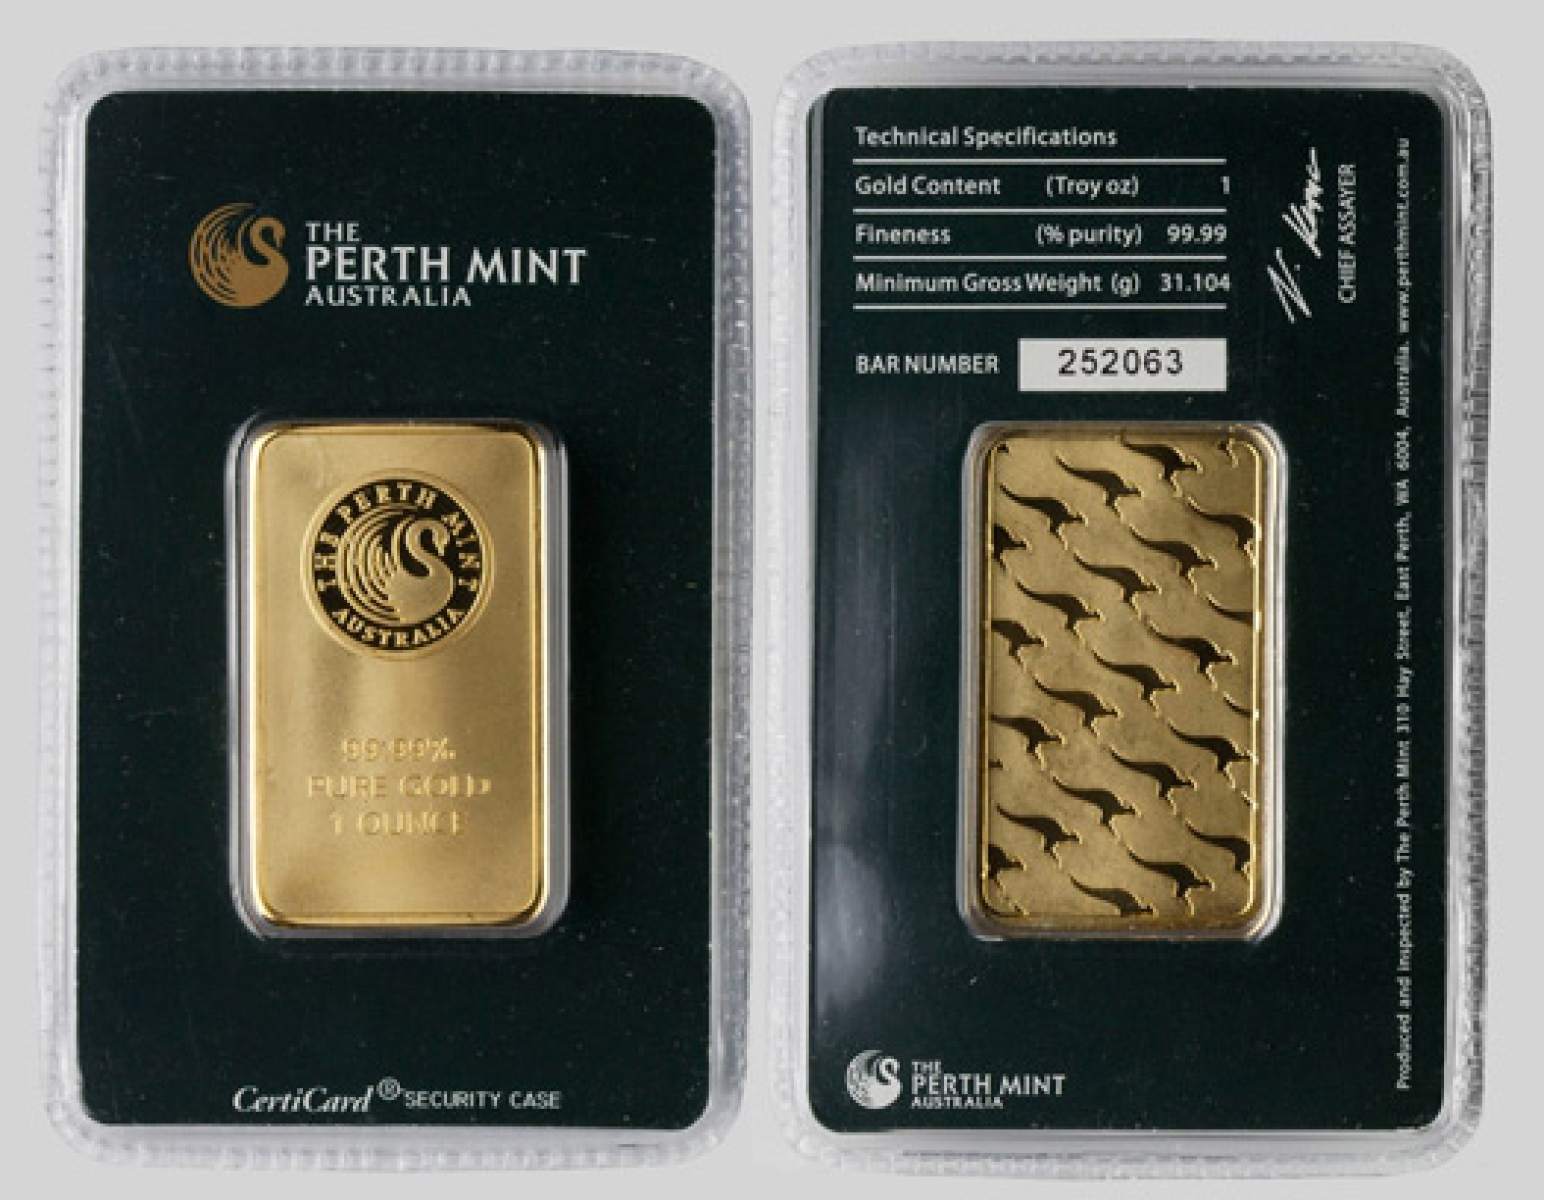 Fake-branded gold bars are slipping into world markets, bankrolling drug  kingpins and warlords